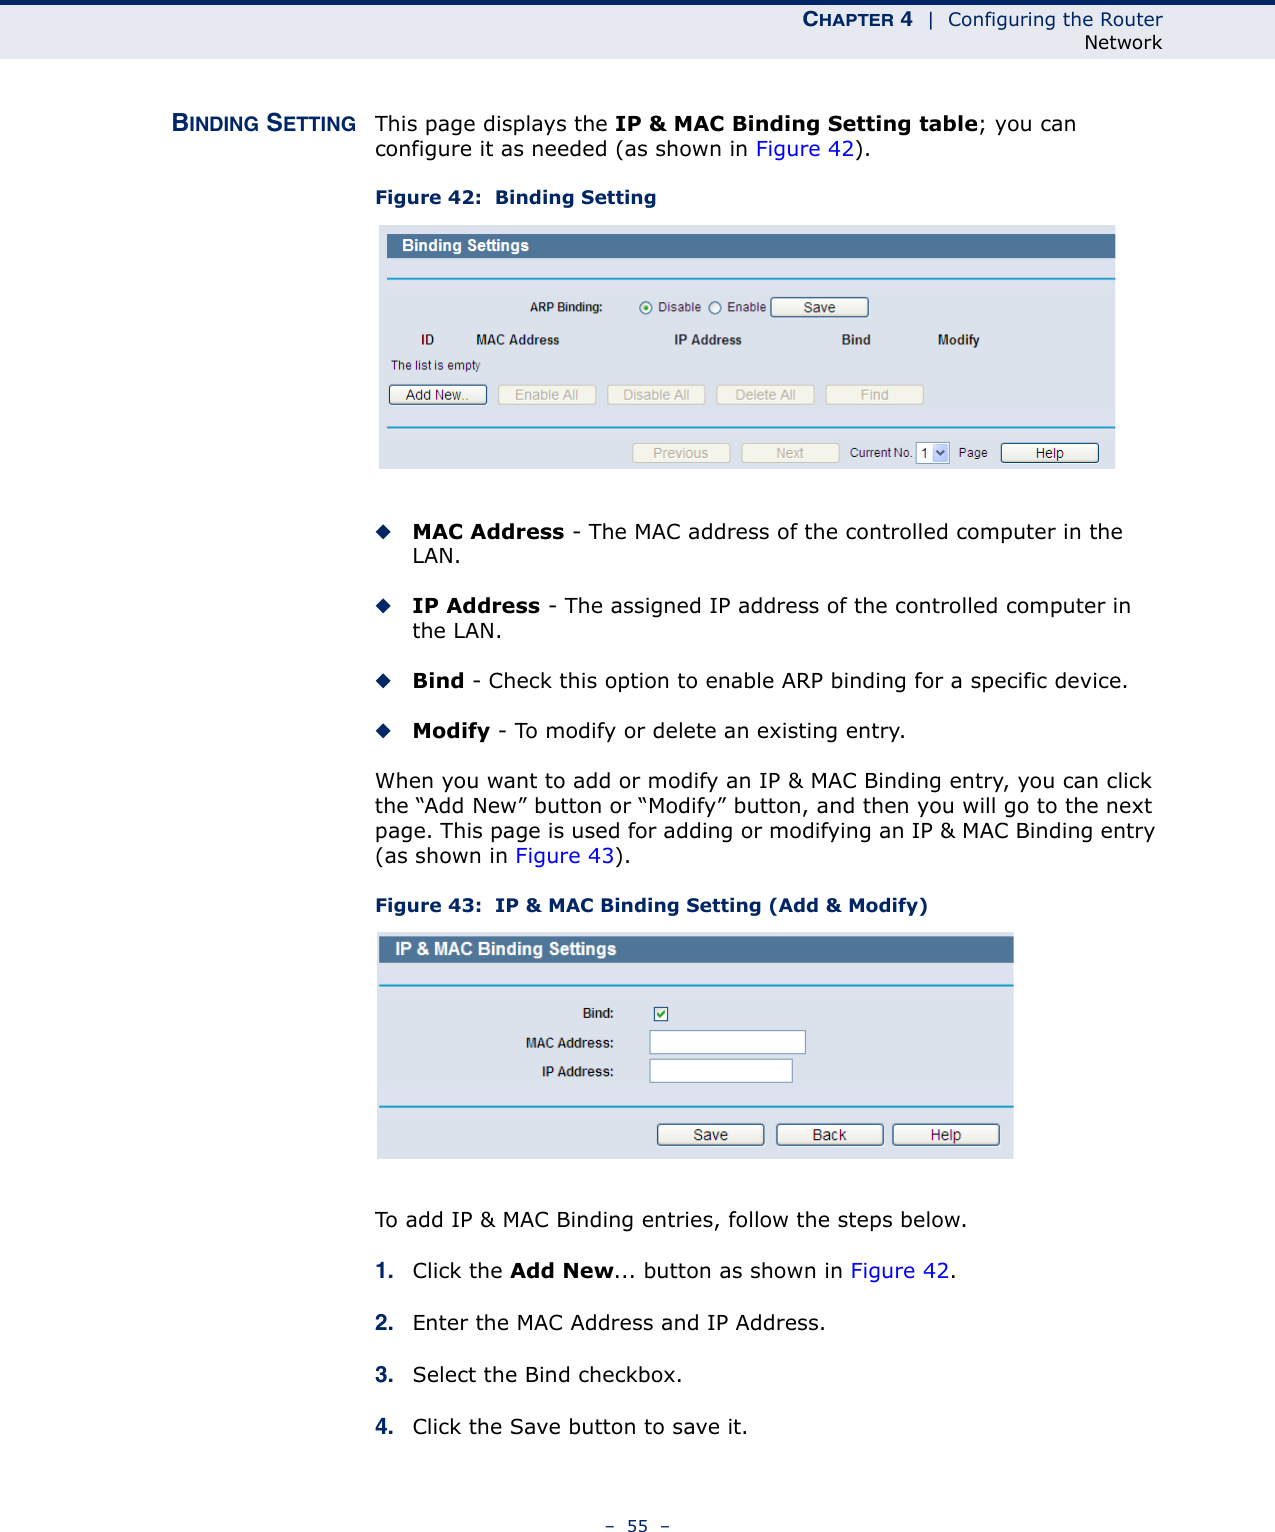 CHAPTER 4  |  Configuring the RouterNetwork–  55  –BINDING SETTING This page displays the IP &amp; MAC Binding Setting table; you can configure it as needed (as shown in Figure 42). Figure 42:  Binding Setting◆MAC Address - The MAC address of the controlled computer in the LAN. ◆IP Address - The assigned IP address of the controlled computer in the LAN. ◆Bind - Check this option to enable ARP binding for a specific device. ◆Modify - To modify or delete an existing entry. When you want to add or modify an IP &amp; MAC Binding entry, you can click the “Add New” button or “Modify” button, and then you will go to the next page. This page is used for adding or modifying an IP &amp; MAC Binding entry (as shown in Figure 43).Figure 43:  IP &amp; MAC Binding Setting (Add &amp; Modify)To add IP &amp; MAC Binding entries, follow the steps below.1. Click the Add New... button as shown in Figure 42. 2. Enter the MAC Address and IP Address.3. Select the Bind checkbox. 4. Click the Save button to save it.